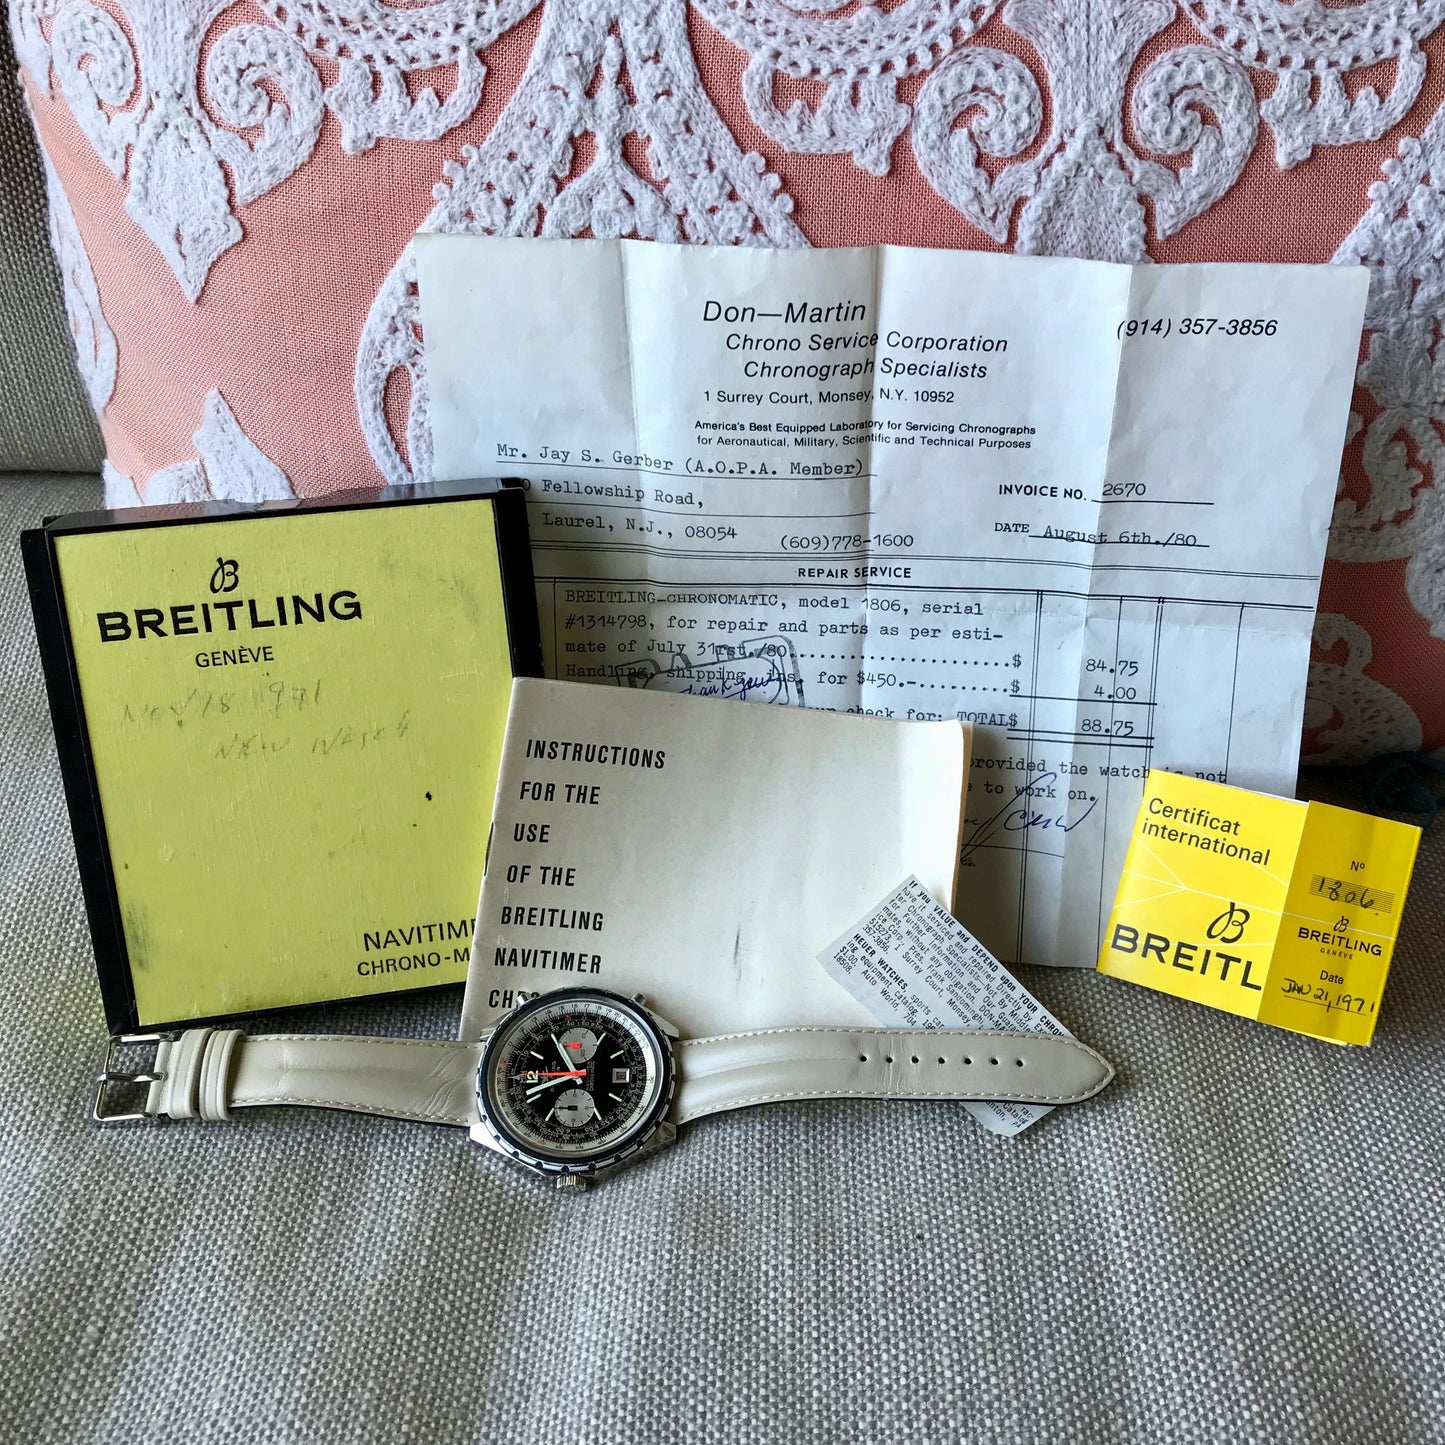 Vintage Breitling Navitimer Chrono-Matic 1806 Stainless Steel Automatic Chronograph Watch 1969 Box & Papers - Hashtag Watch Company